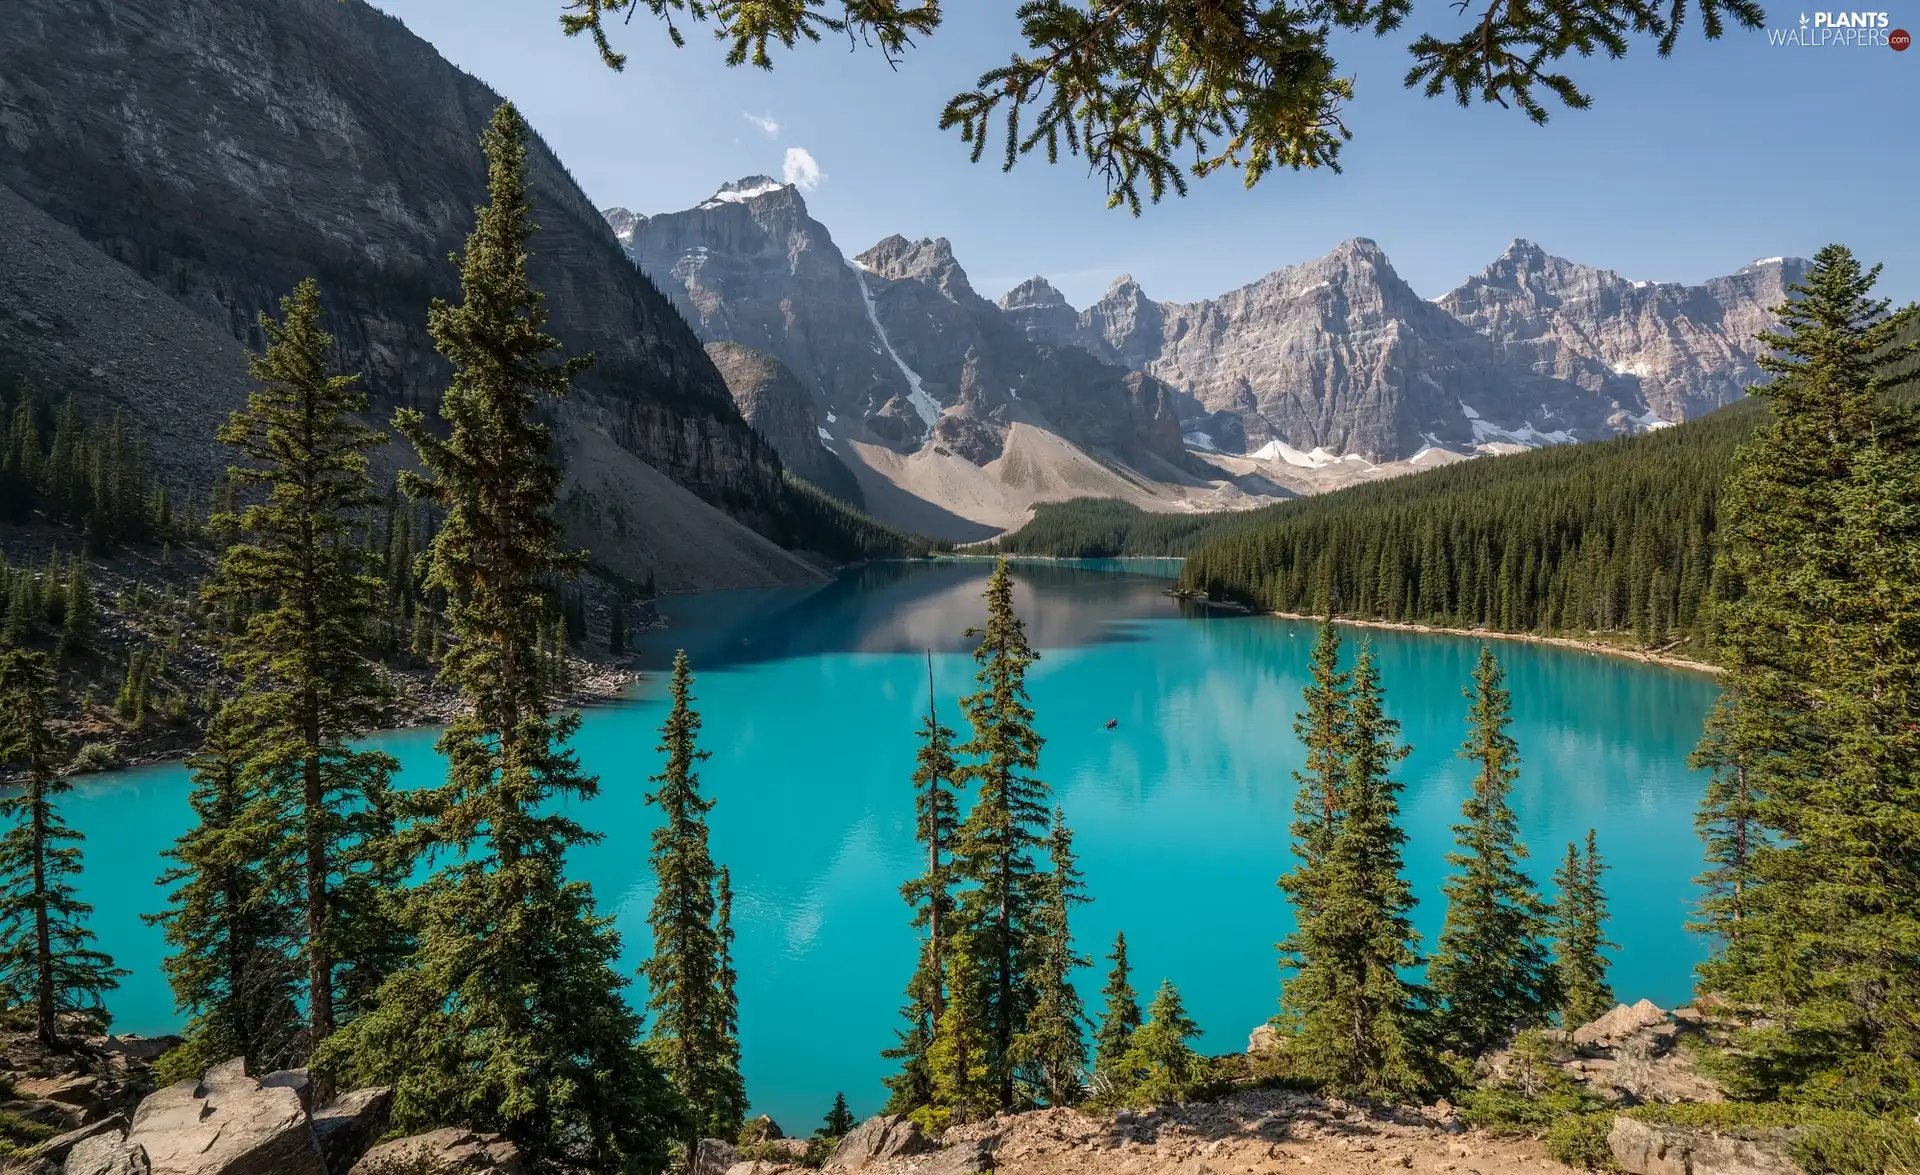 Banff National Park, Lake Moraine, Mountains, forest, viewes, Alberta, Canada, trees